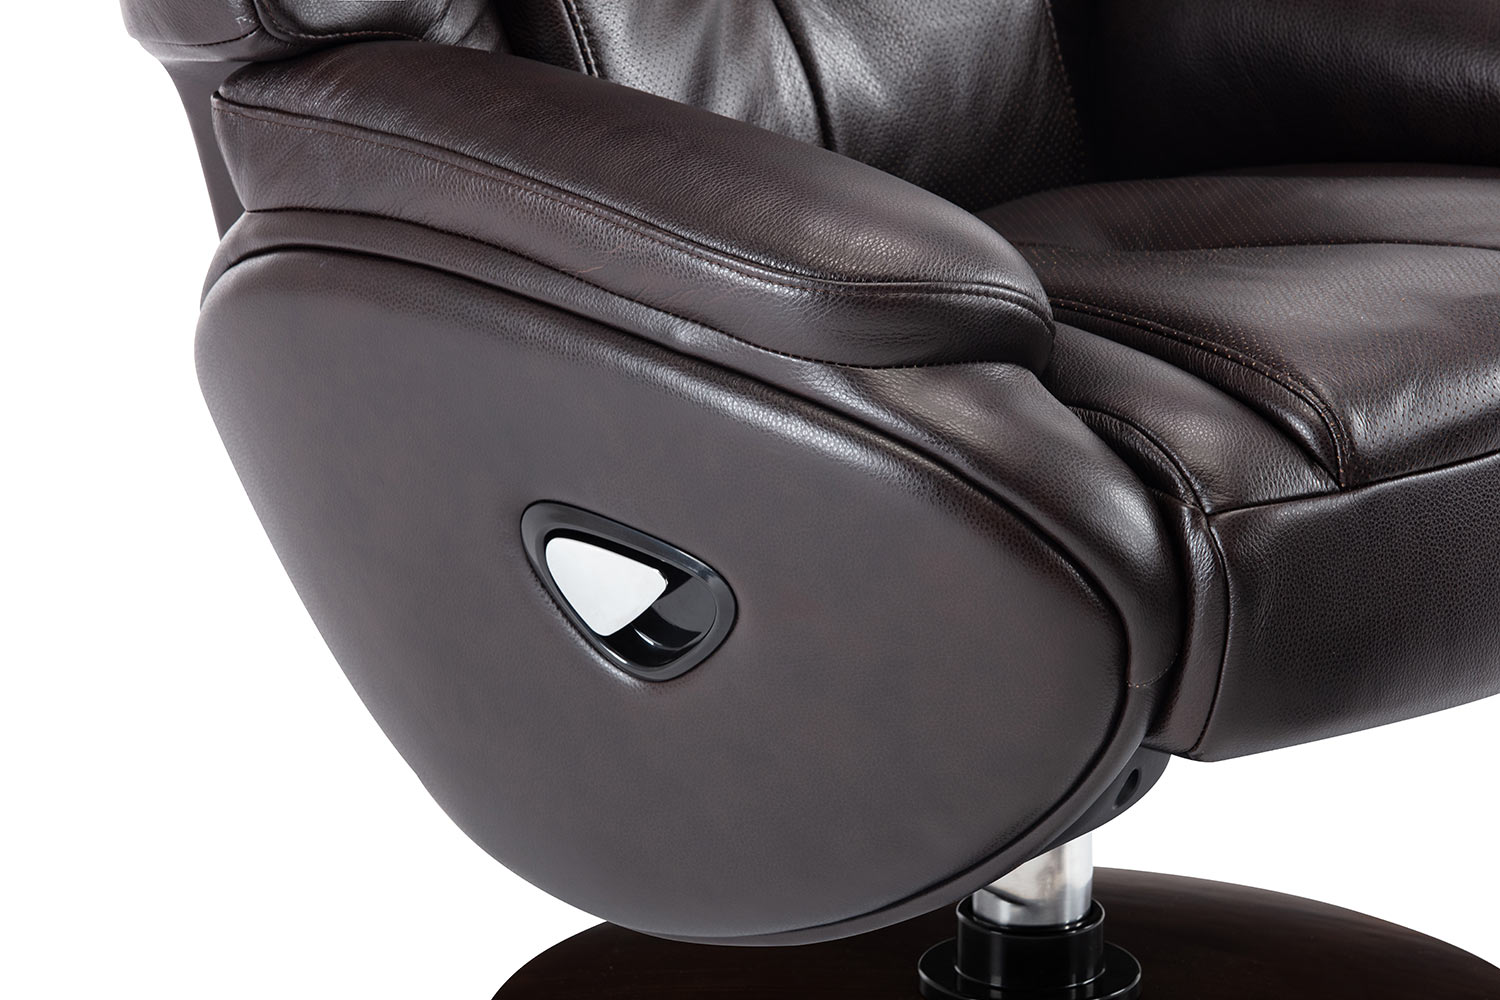 Barcalounger Marjon Pedestal Recliner Chair and Ottoman - Janie Chocolate/Leather match